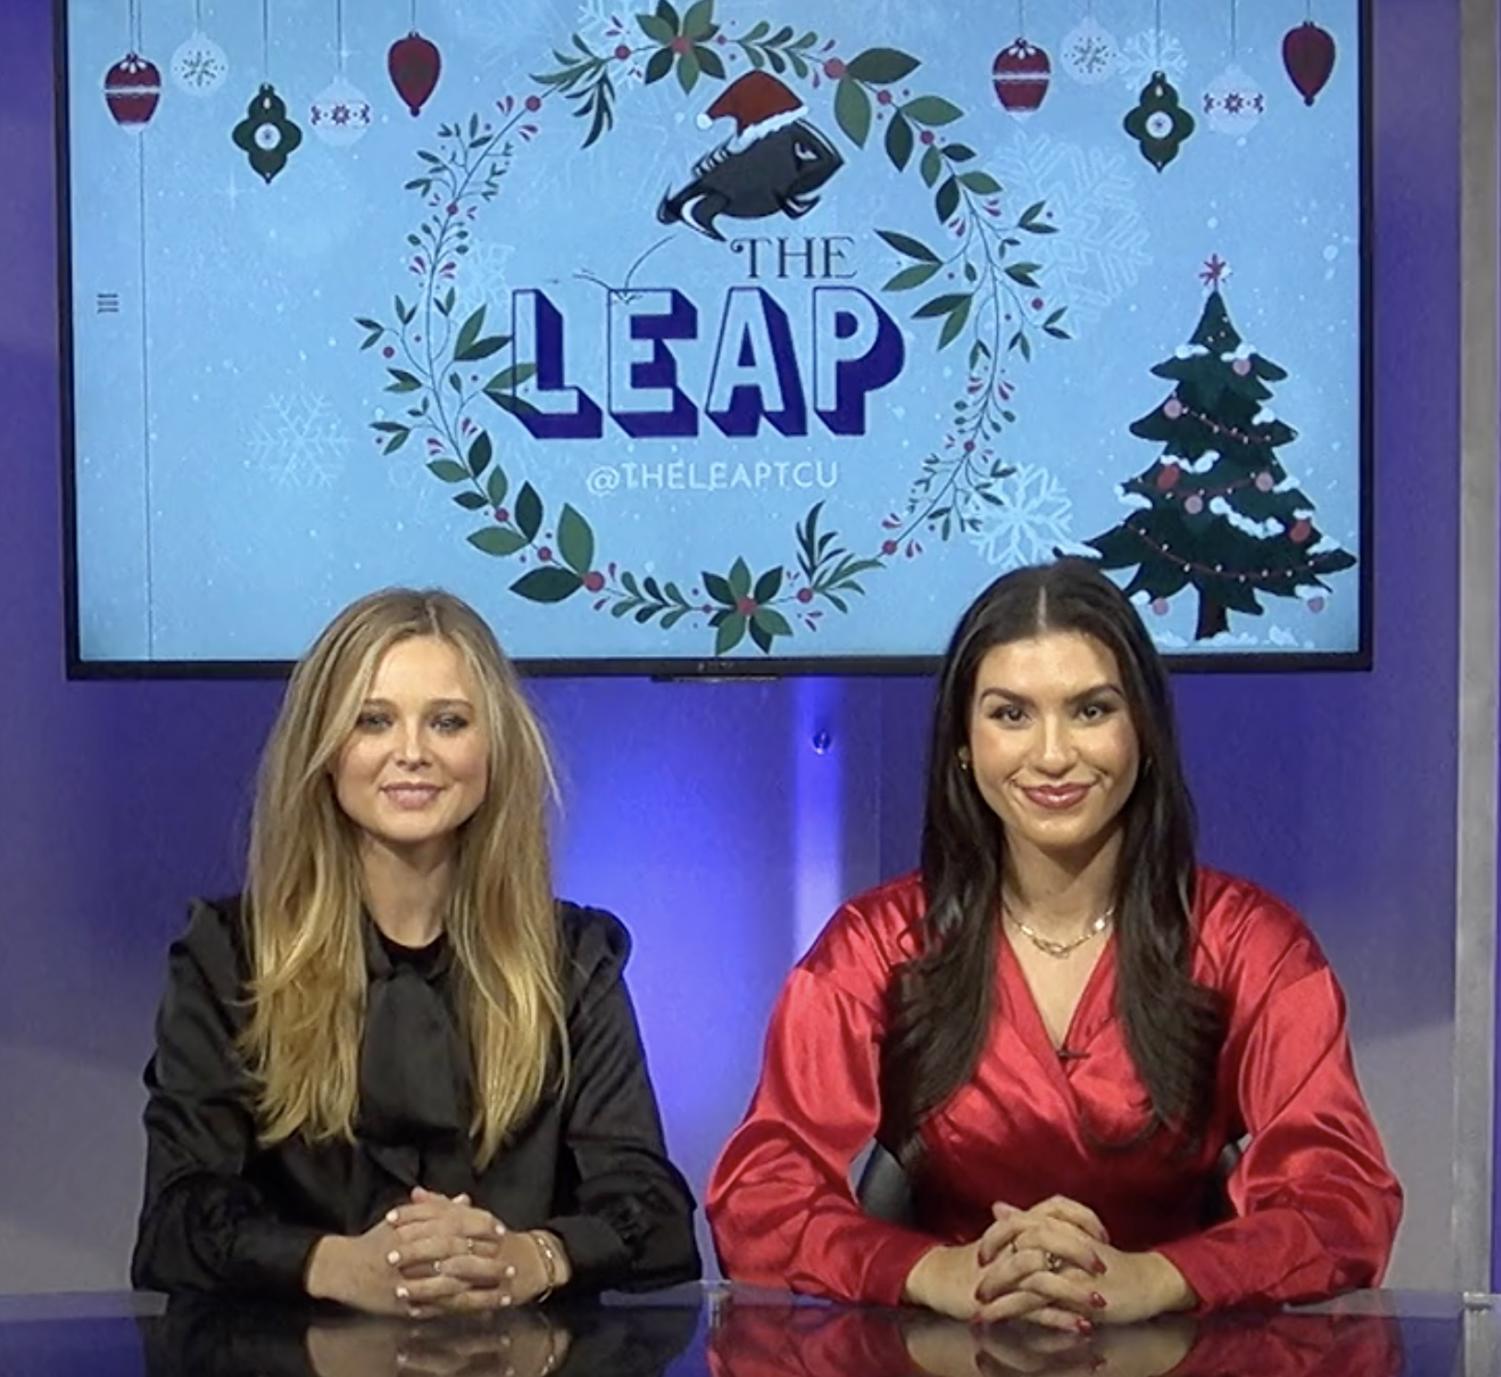 The Leap: Buddy the Elf spotting, Forbes 30 Under 30 Cover, “Chrisley Knows Best” couple in hot water, and more!